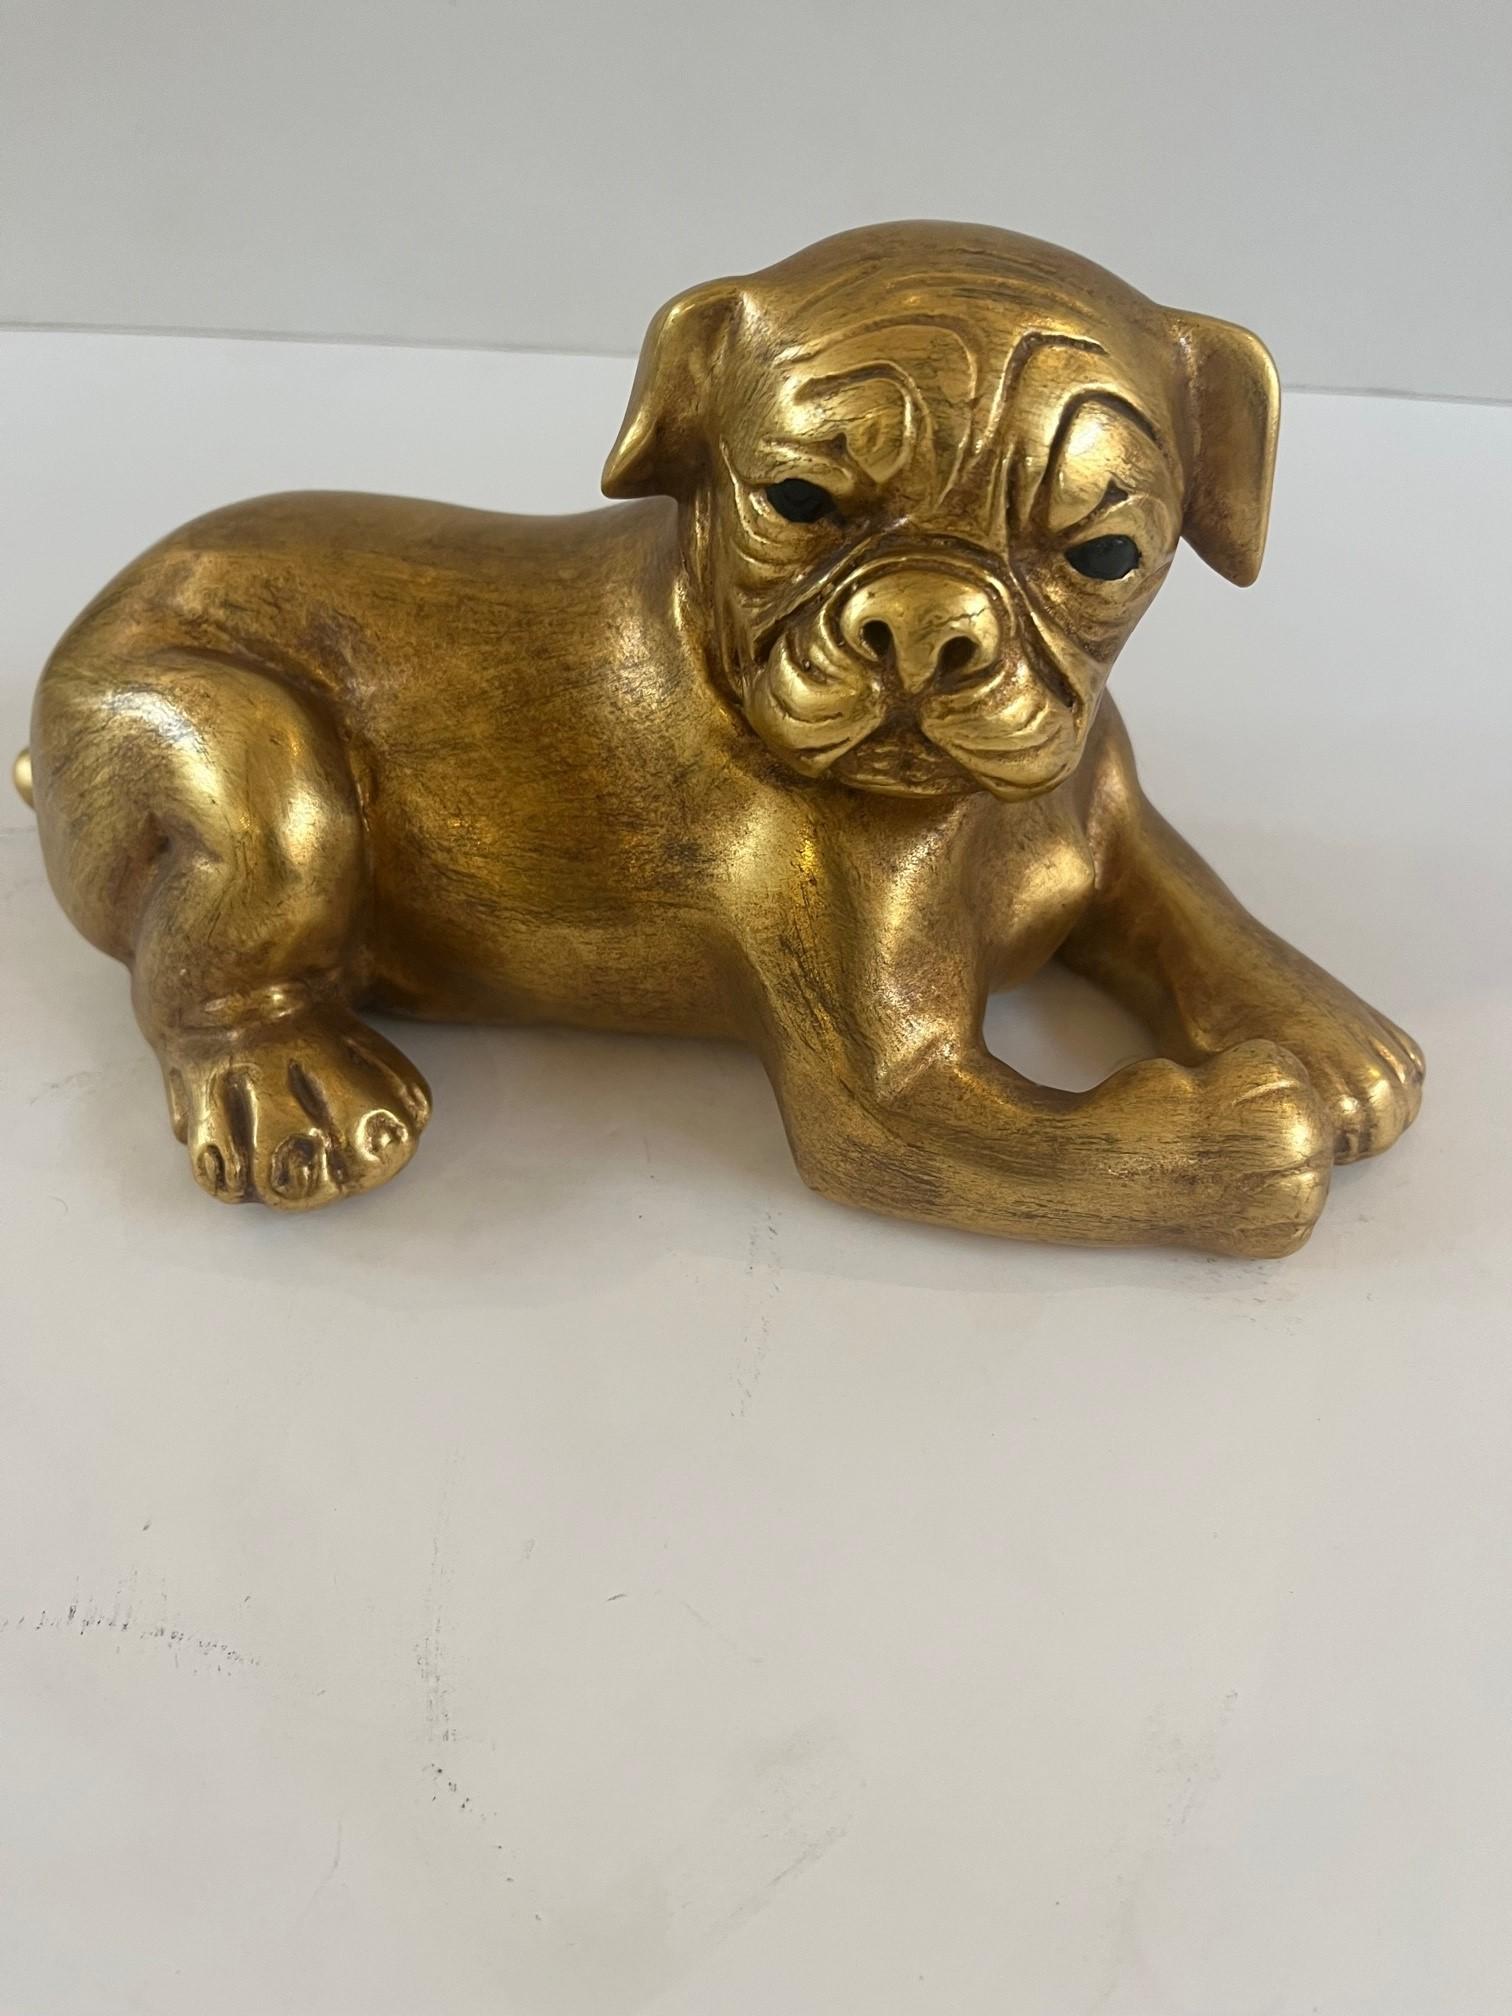 Vintage Bronze Cast Newly Refinished (Gilt) Pug Dog Sculpture by Maitland Smith For Sale 4